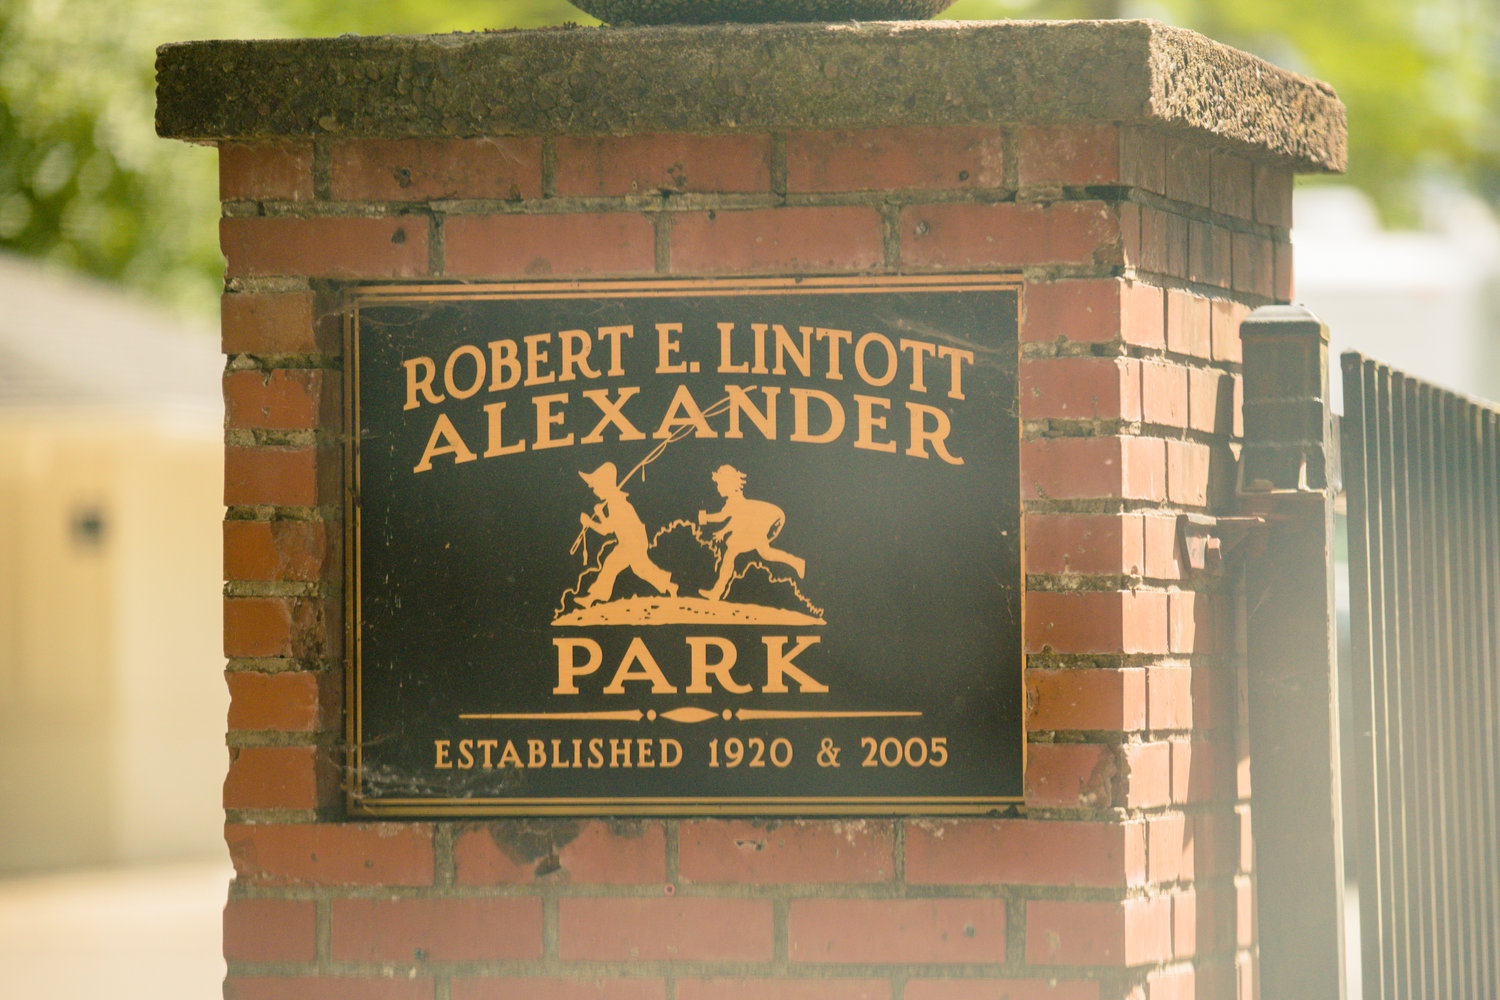 Lintott-Alexander Park is located at 1101 Riverside Road along a bend of the Chehalis River. It boasts a playground, horseshoe pits and picnic facilities near the confluence of the Newaukum River.